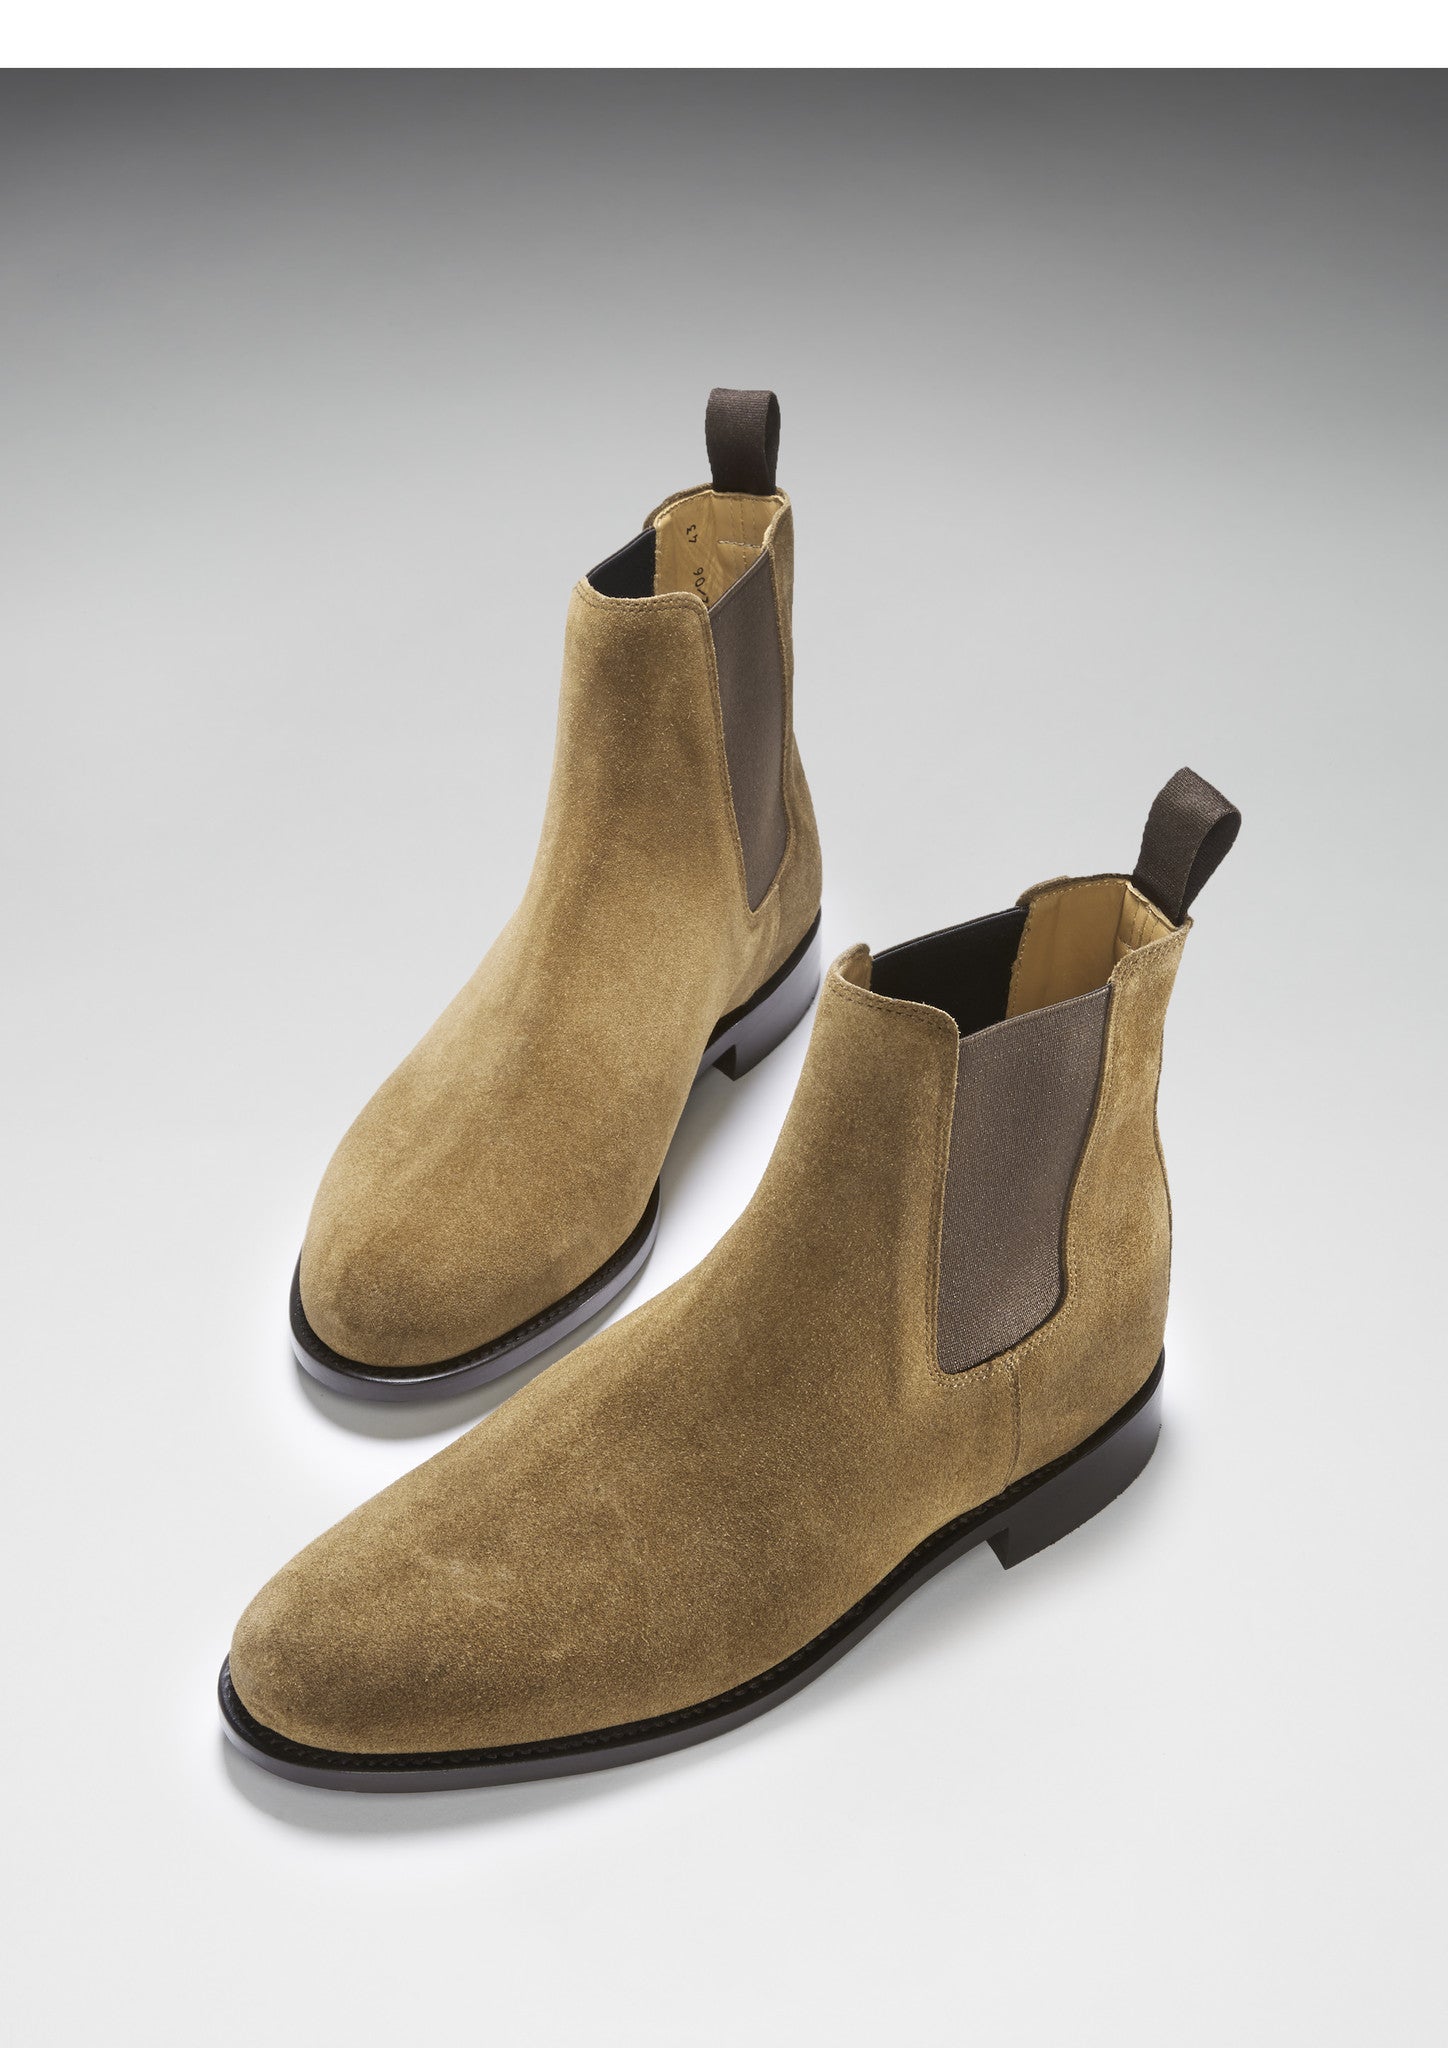 Brobrygge pille Merchandising Tobacco Suede Chelsea Boots, Welted Leather Sole - Hugs & Co.